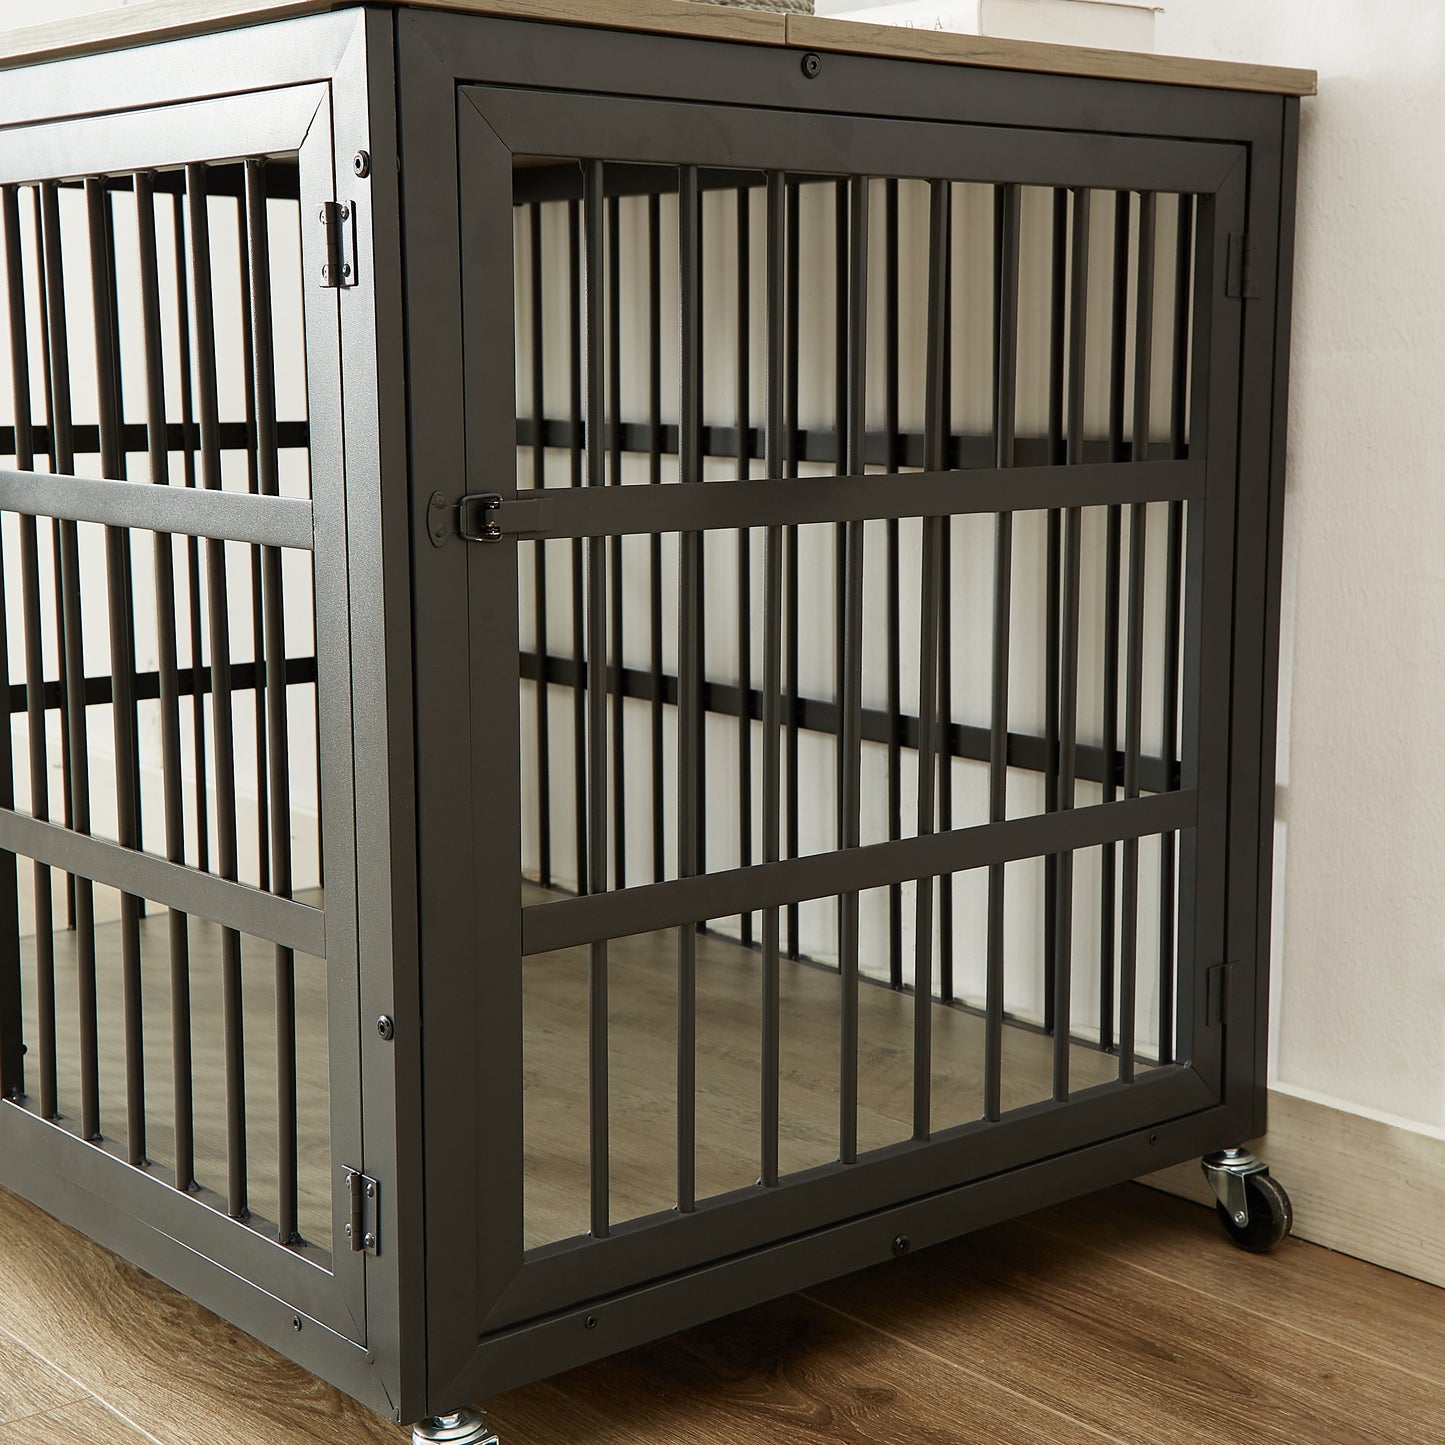 Wrought iron Furniture Style Dog Crate